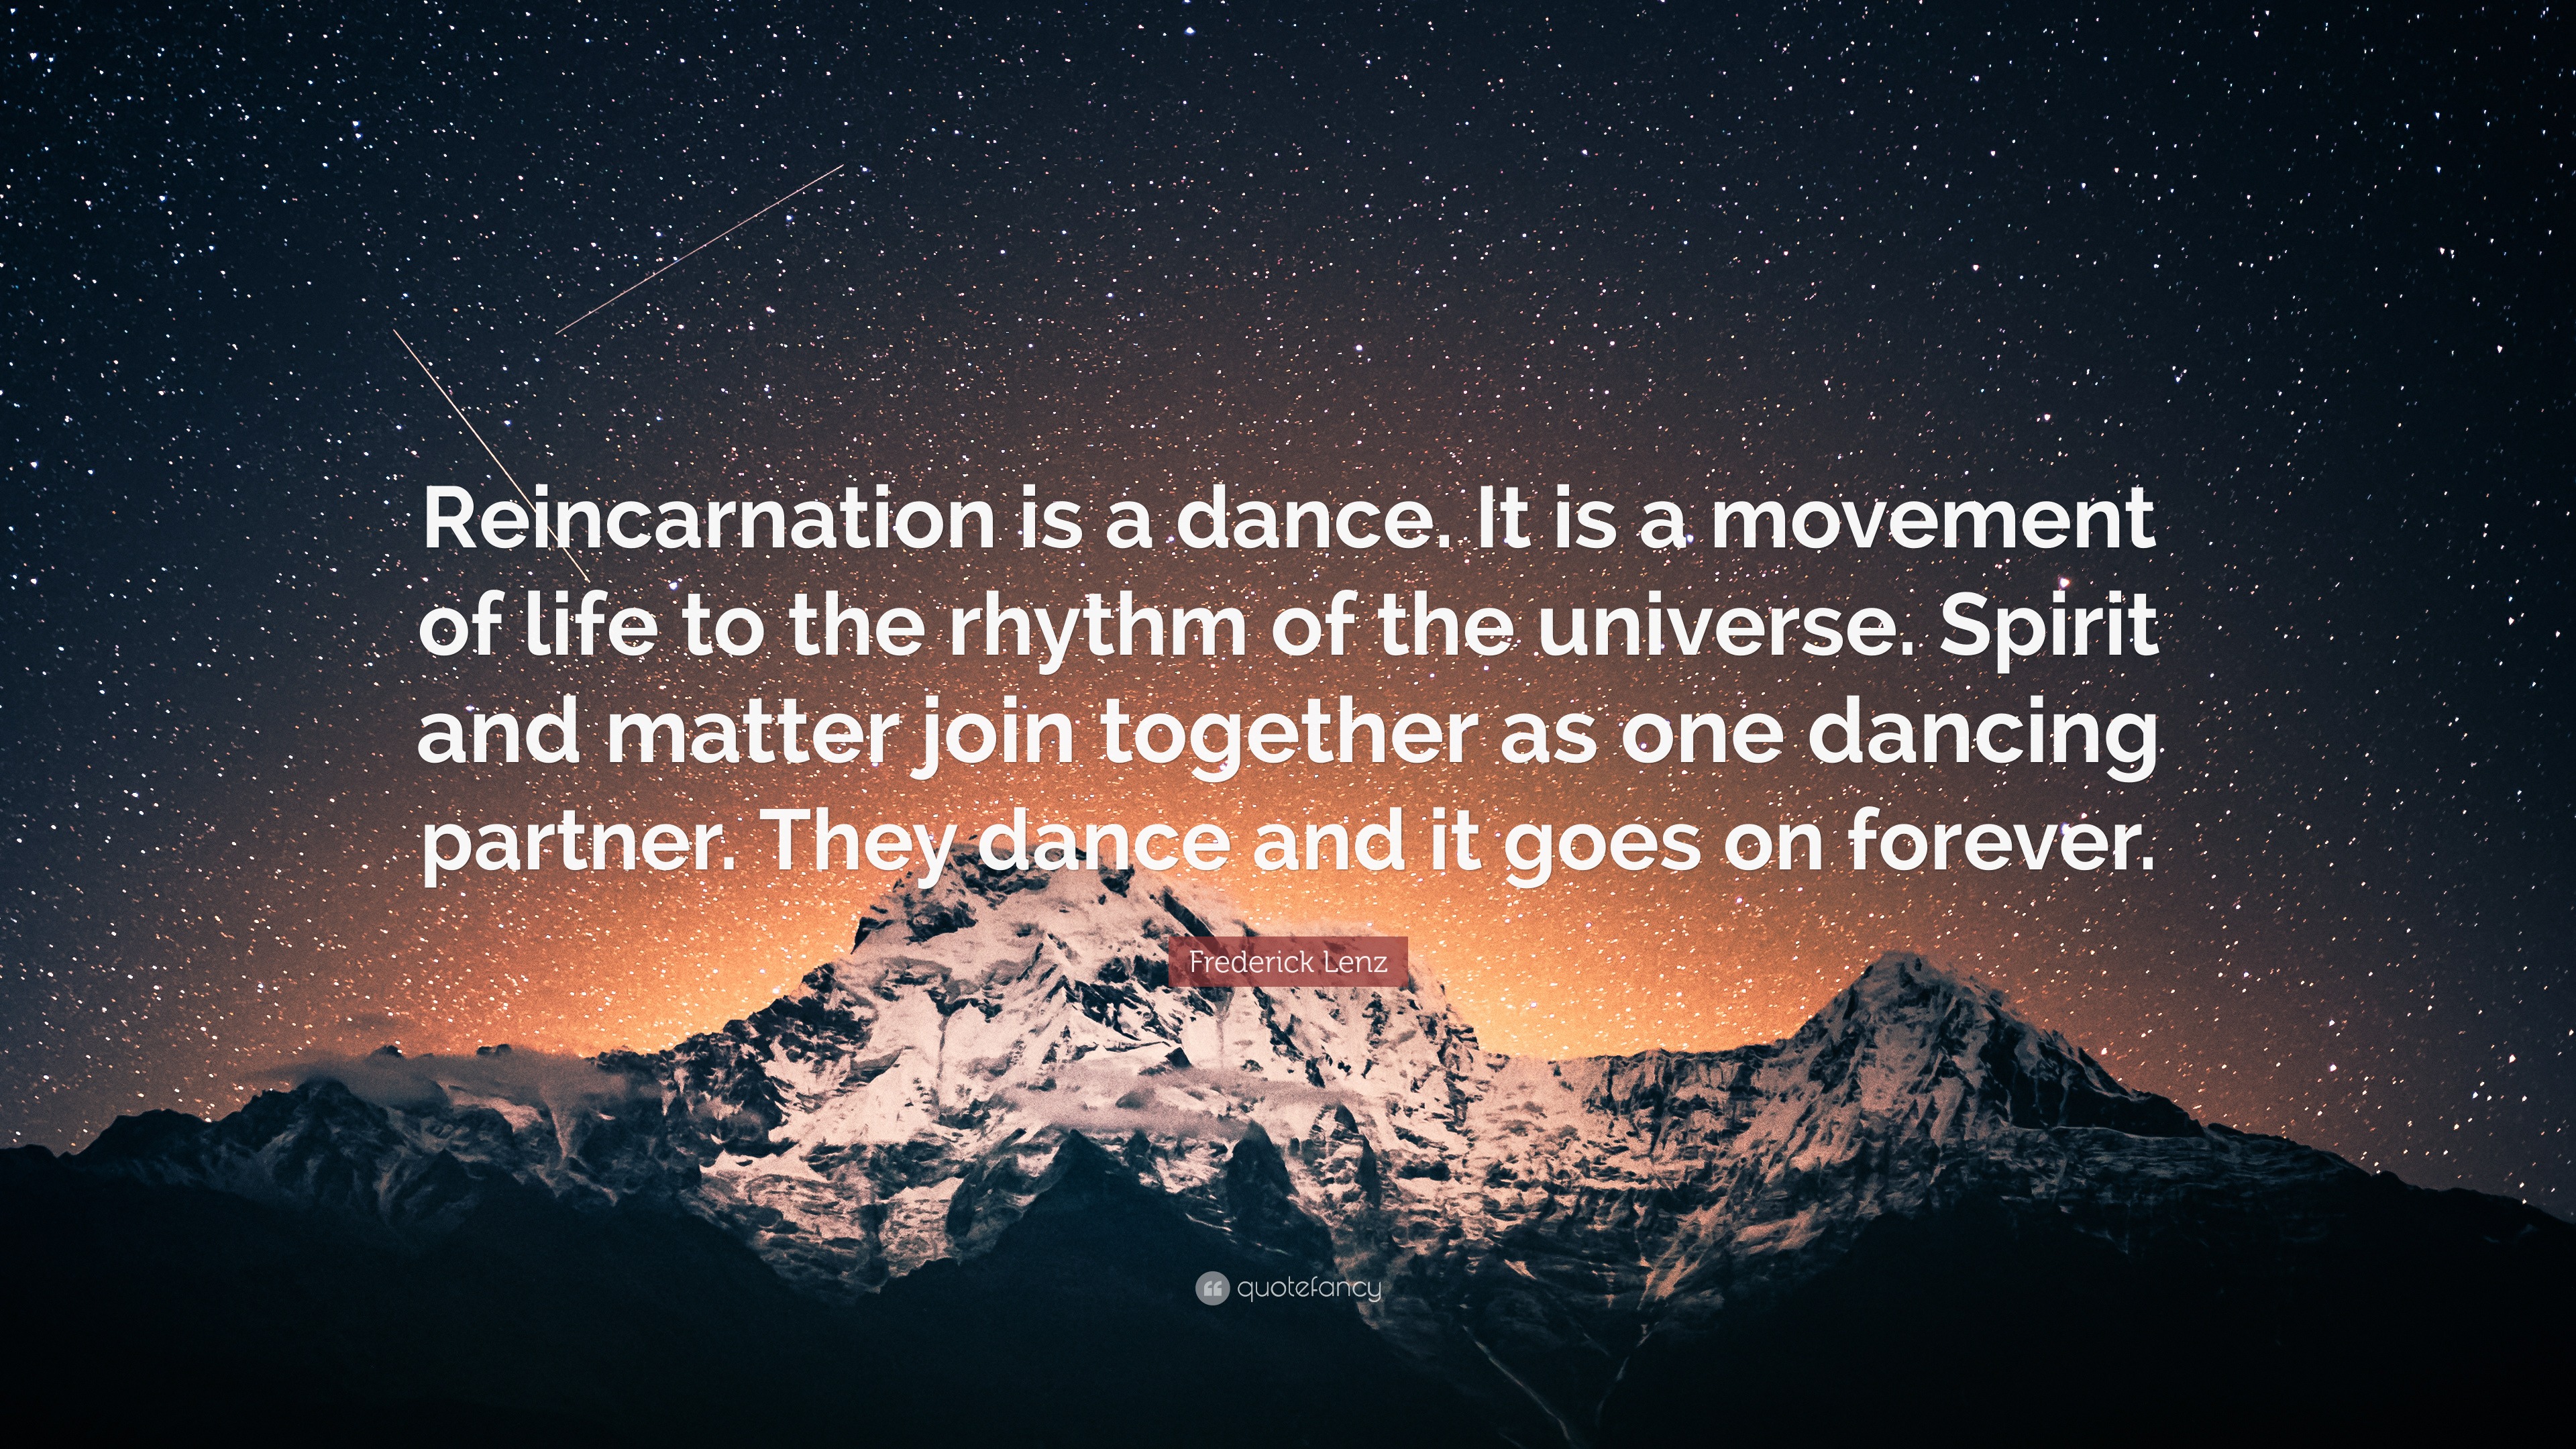 Frederick Lenz Quote Reincarnation Is A Dance It Is A Movement Of Life To The Rhythm Of The Universe Spirit And Matter Join Together As One 12 Wallpapers Quotefancy